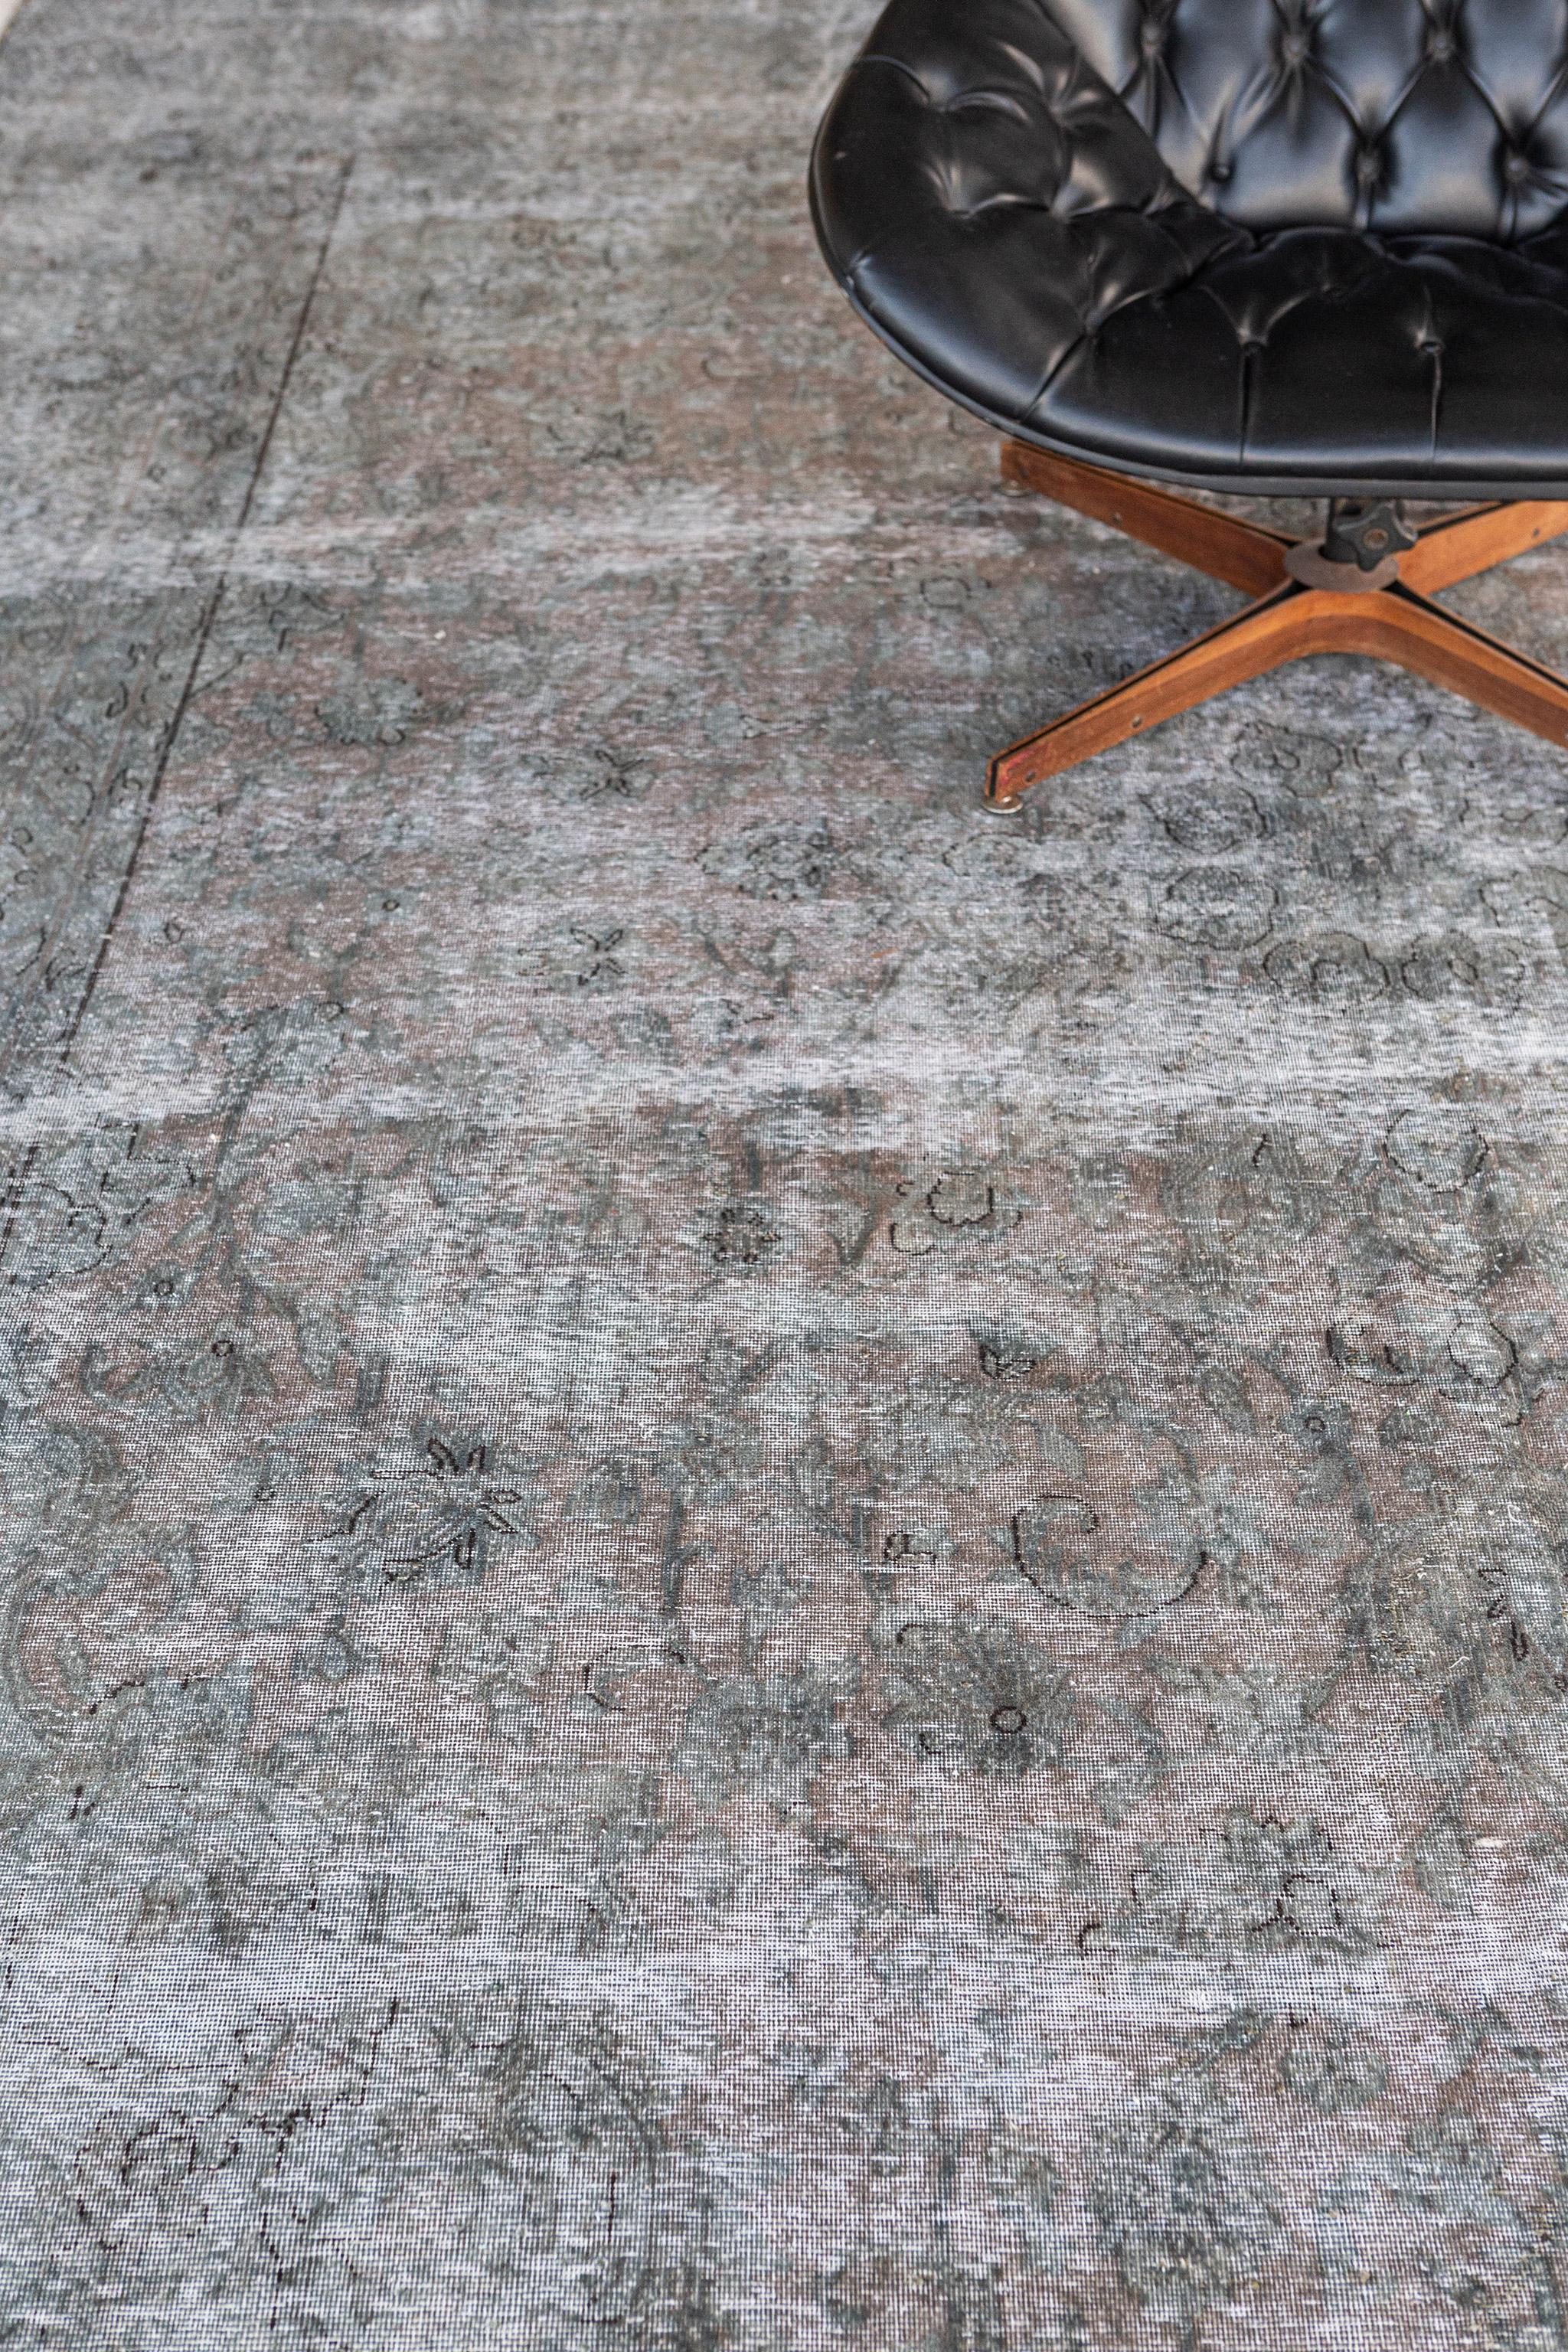 Mehraban of Los Angeles continues to speak to the modern design cues and needs with their distinctive vintage distressed rug collection. Sandra Espinet, is synonymous for her designer contemporary rugs, is the lead designer behind this piece.

Rug